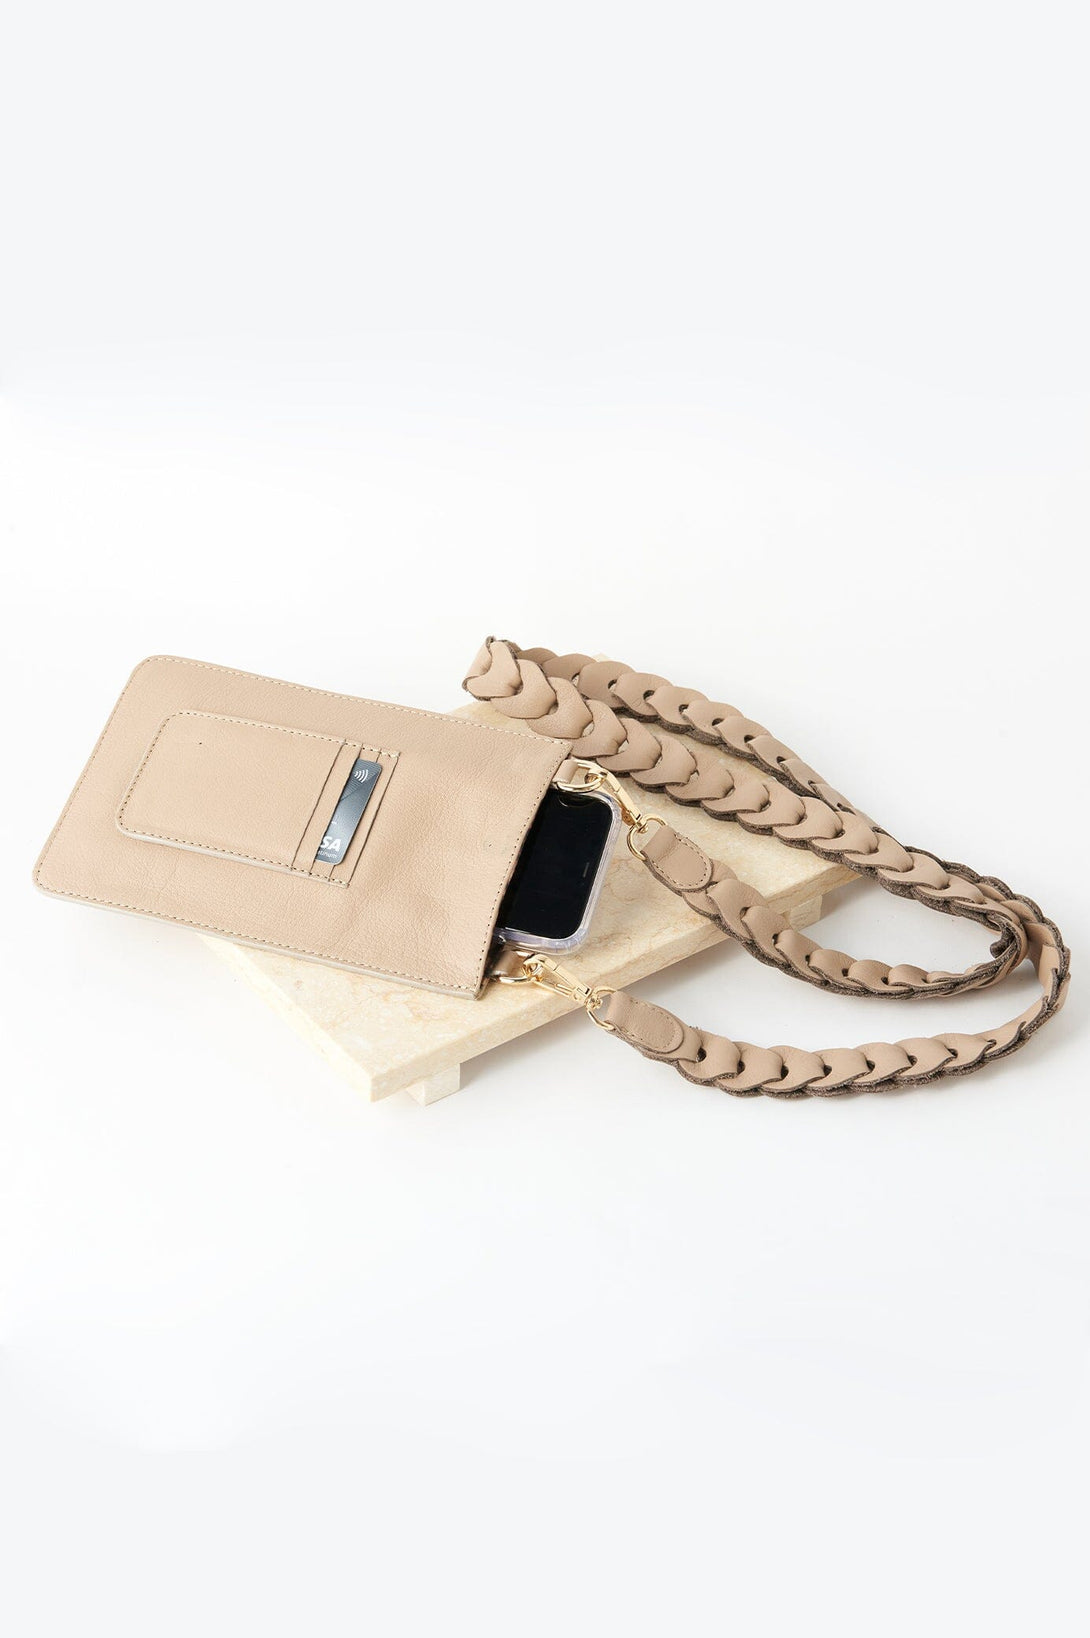 Adelina Mobile Phone Holder Nude Soft Leather Leather